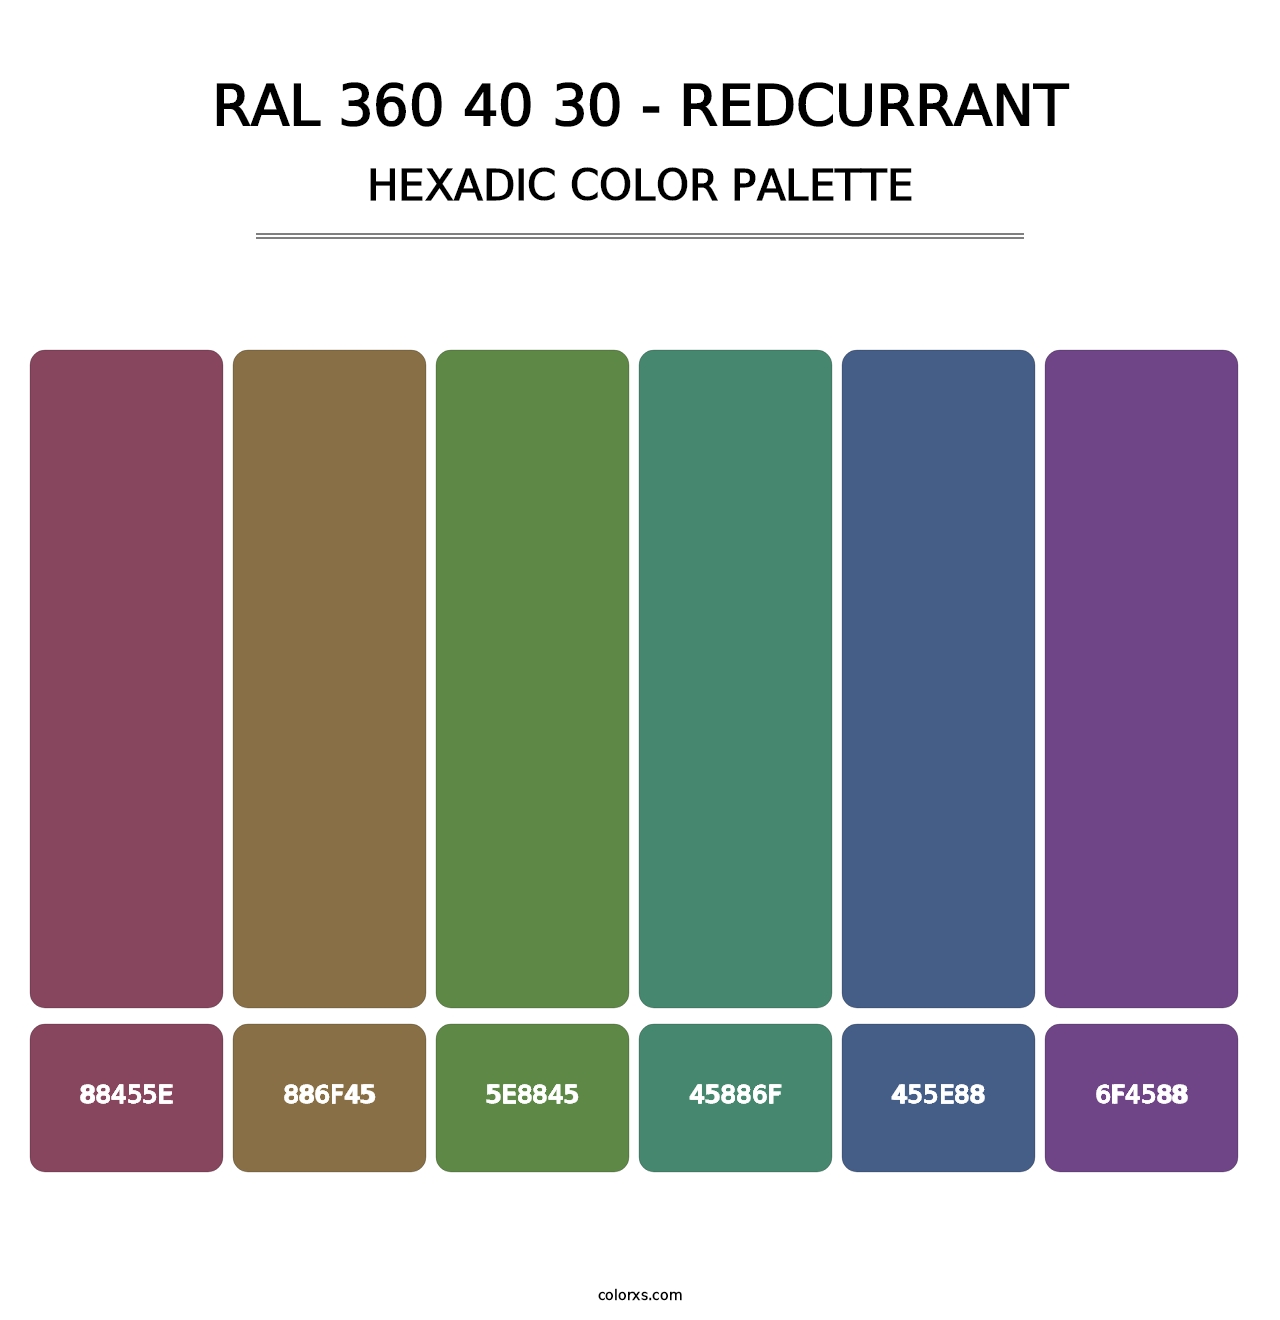 RAL 360 40 30 - Redcurrant - Hexadic Color Palette